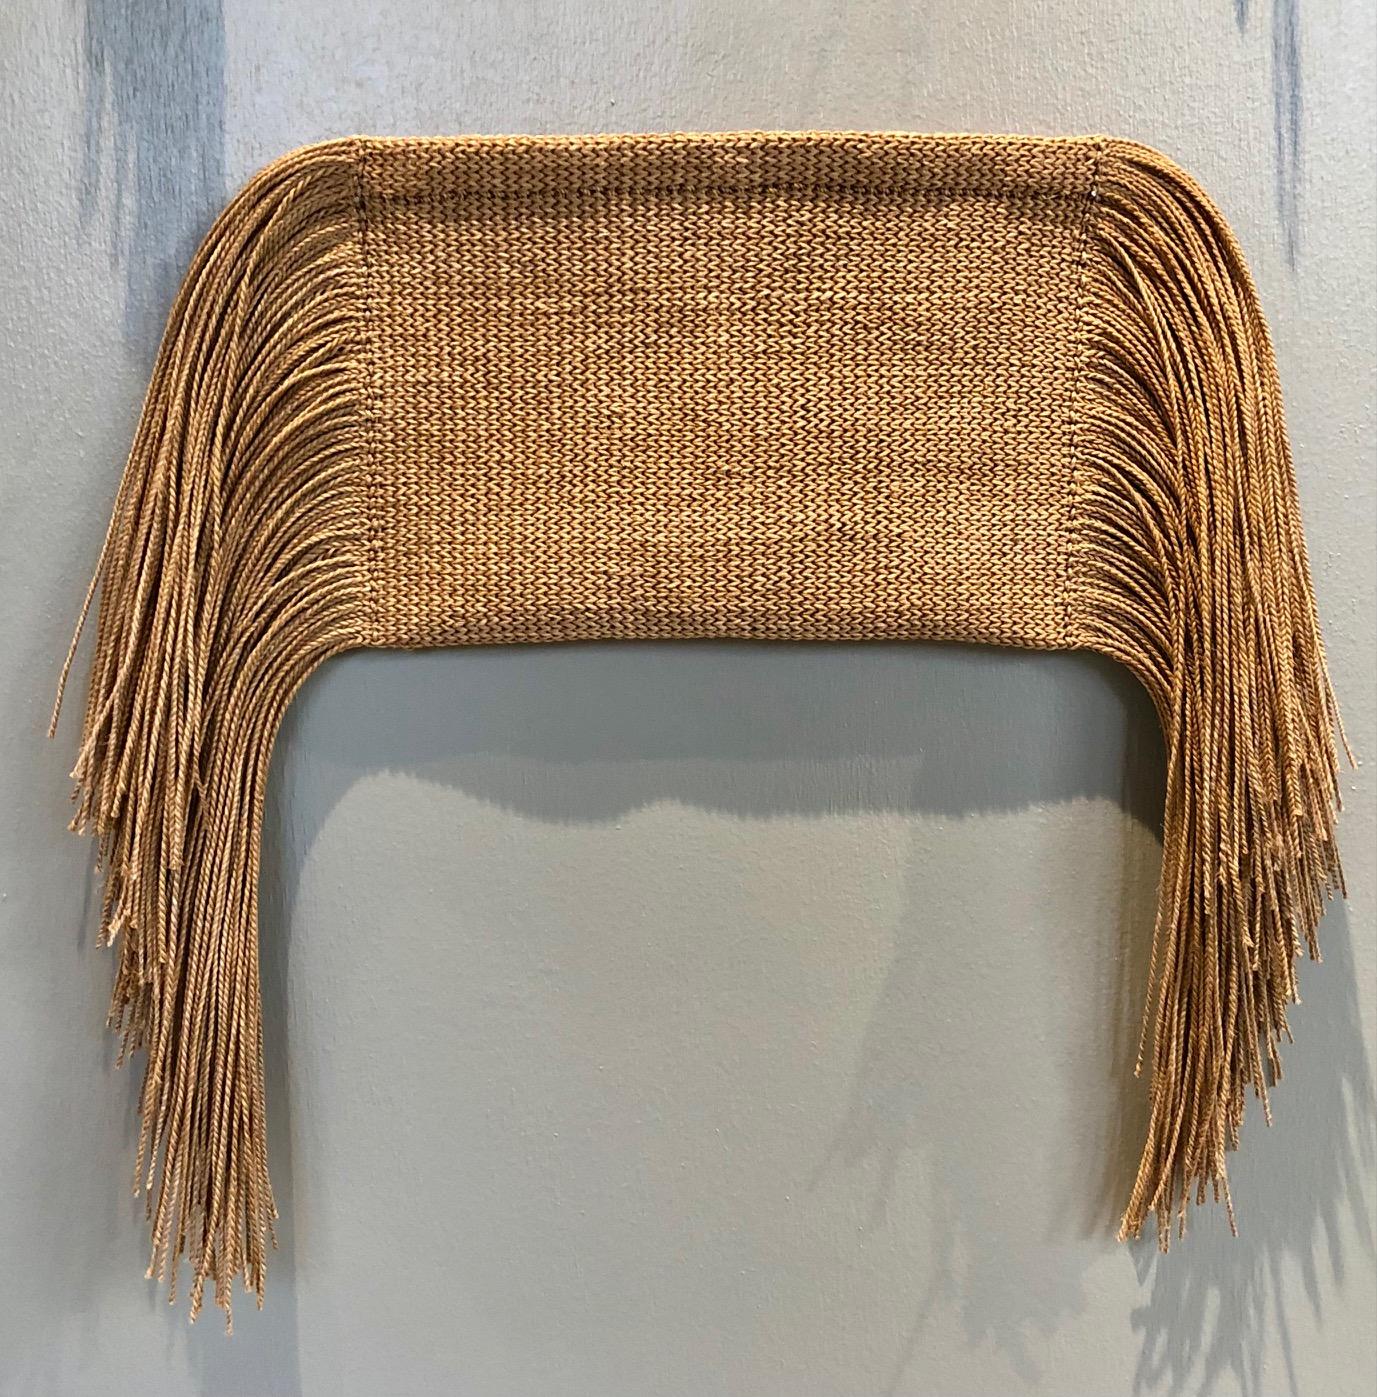 Venus y Loco, Marigold Mecapal Clutch Bag, 2021, spun natural agave fiber, dyed with Mexican Marigold, 11.75” x 15.75” x 1.5”